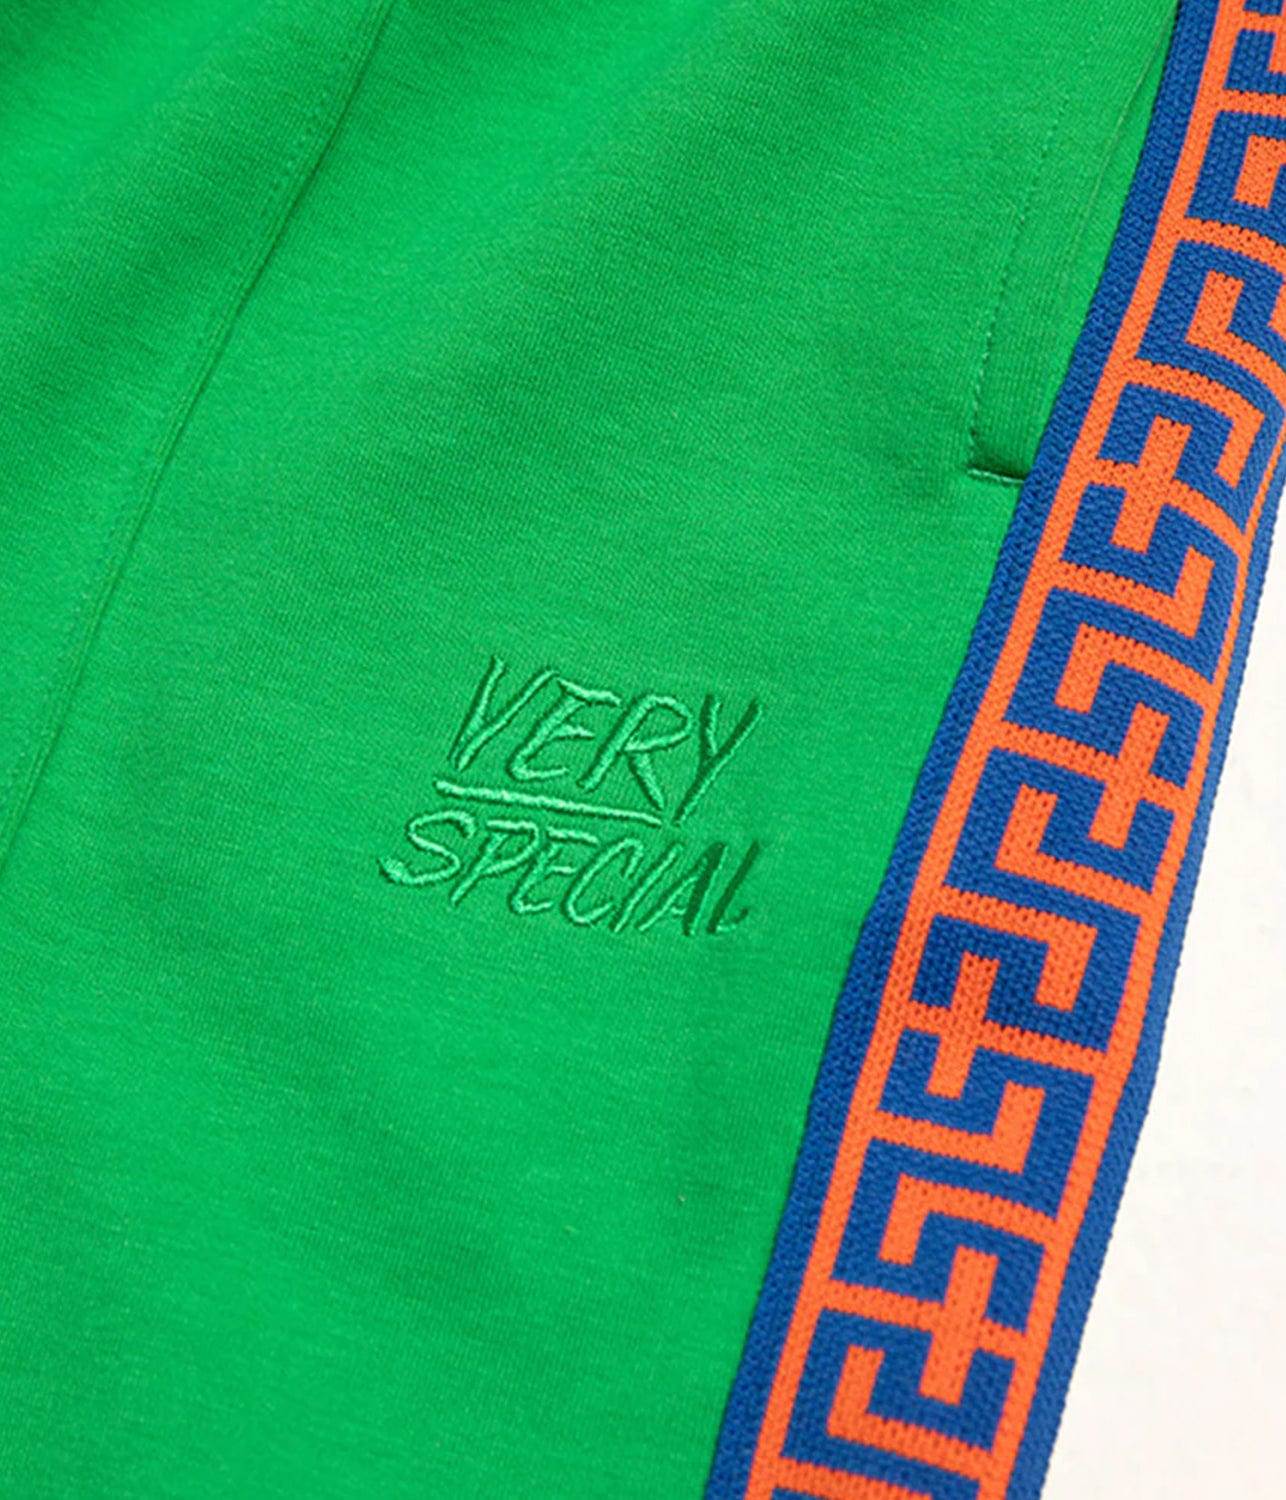 GEO TRACK PANT- GREEN | SOMETHING VERY SPECIAL | SOMETHING VERY SPECIAL GEO TRACK PANT- GREEN